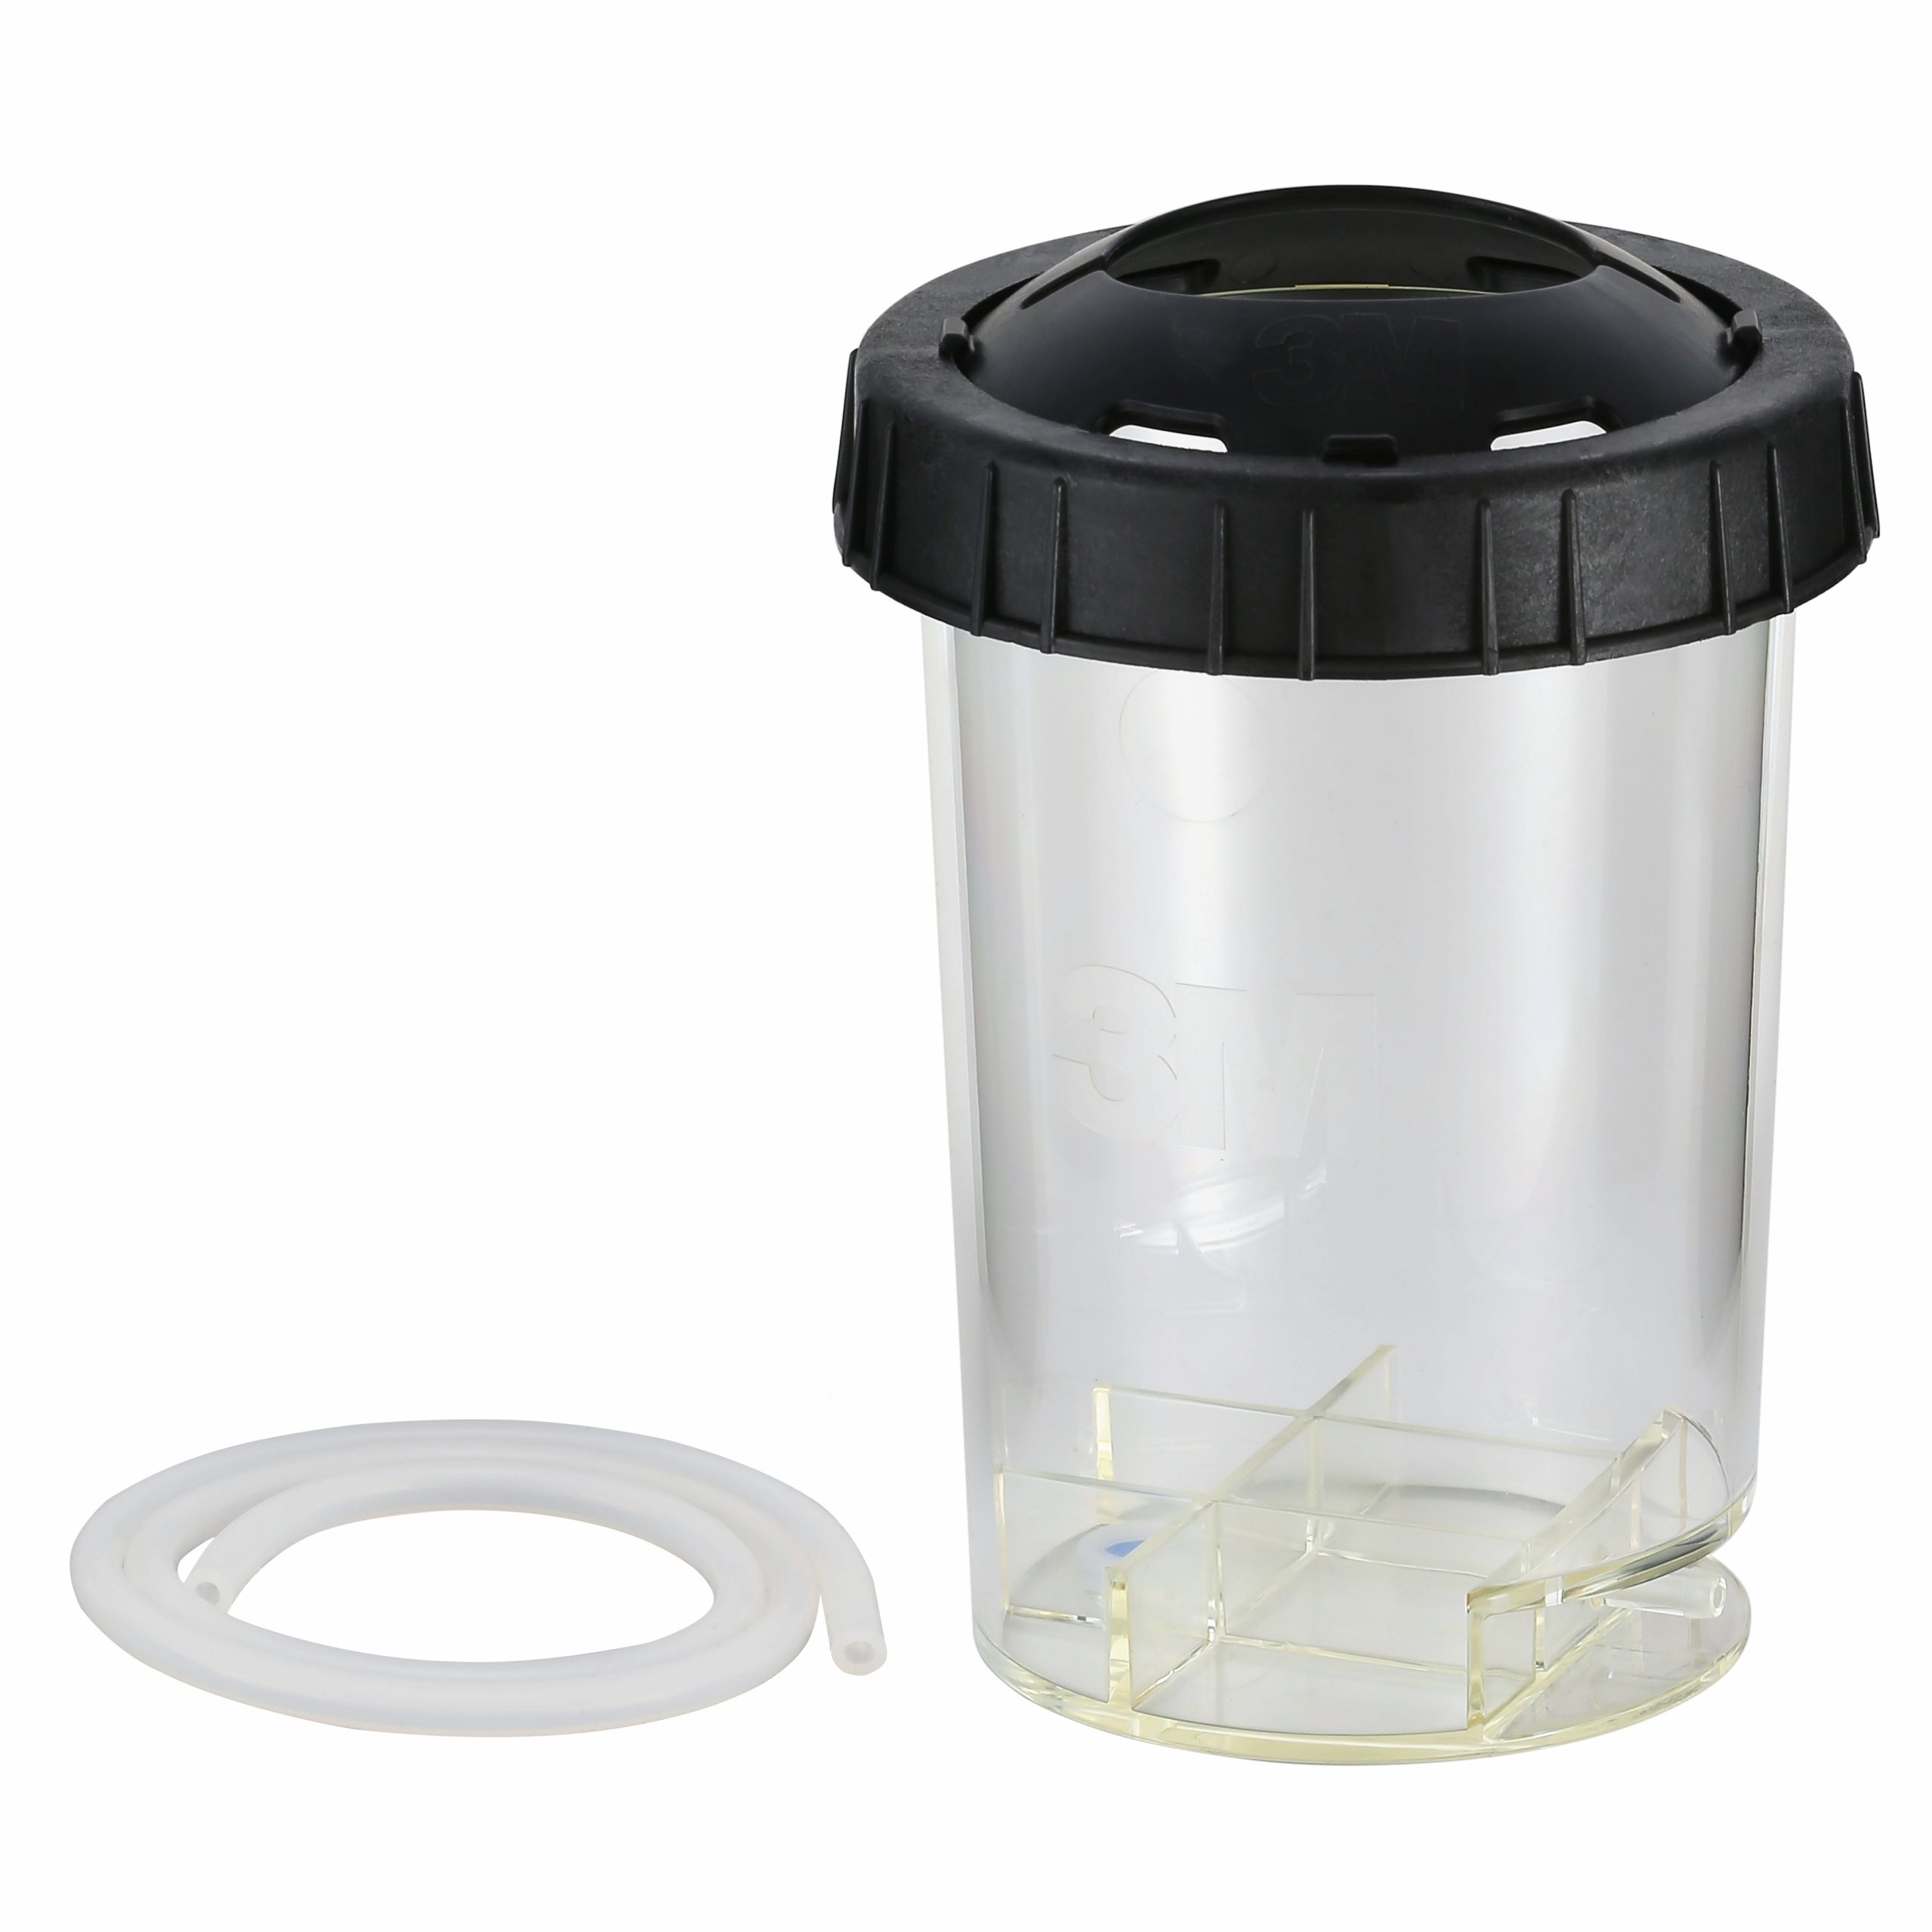 3M PPS 2.0 Large H/O Pressure Cup Assembly - The Finishing Store